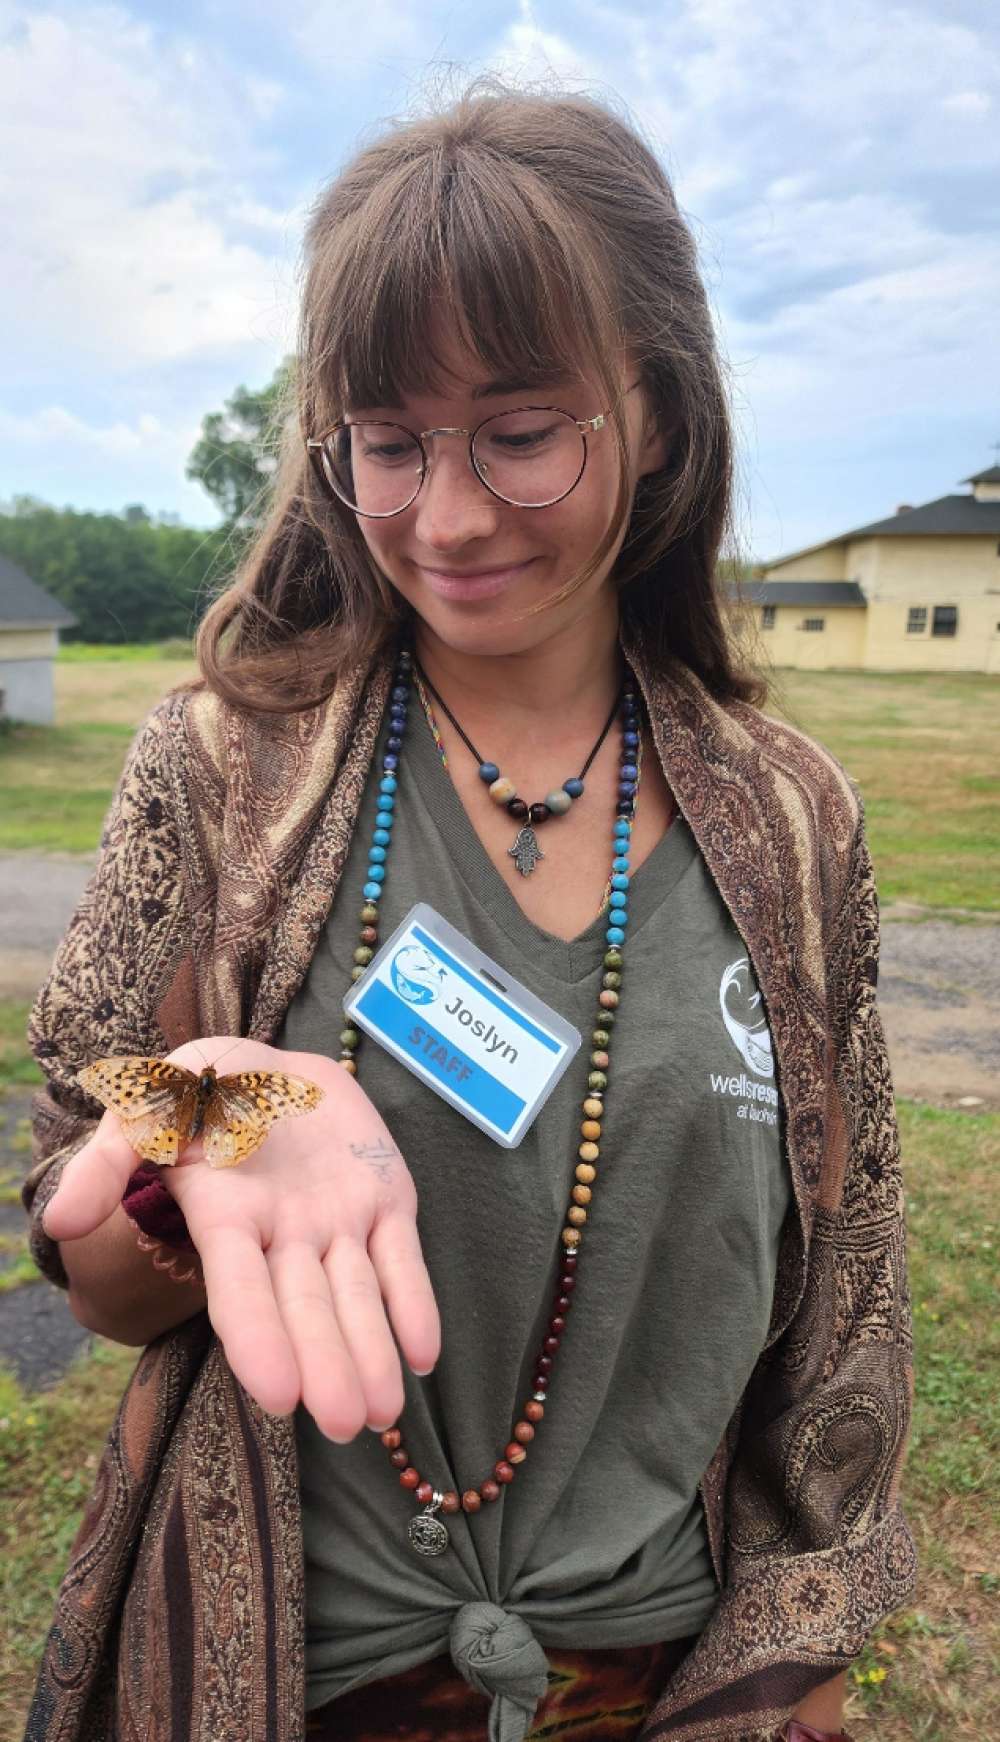 Joslyn Primicias, 2022 camp assistant at the Wells Reserve, observes a fritillary butterfly on the palm of her hand.